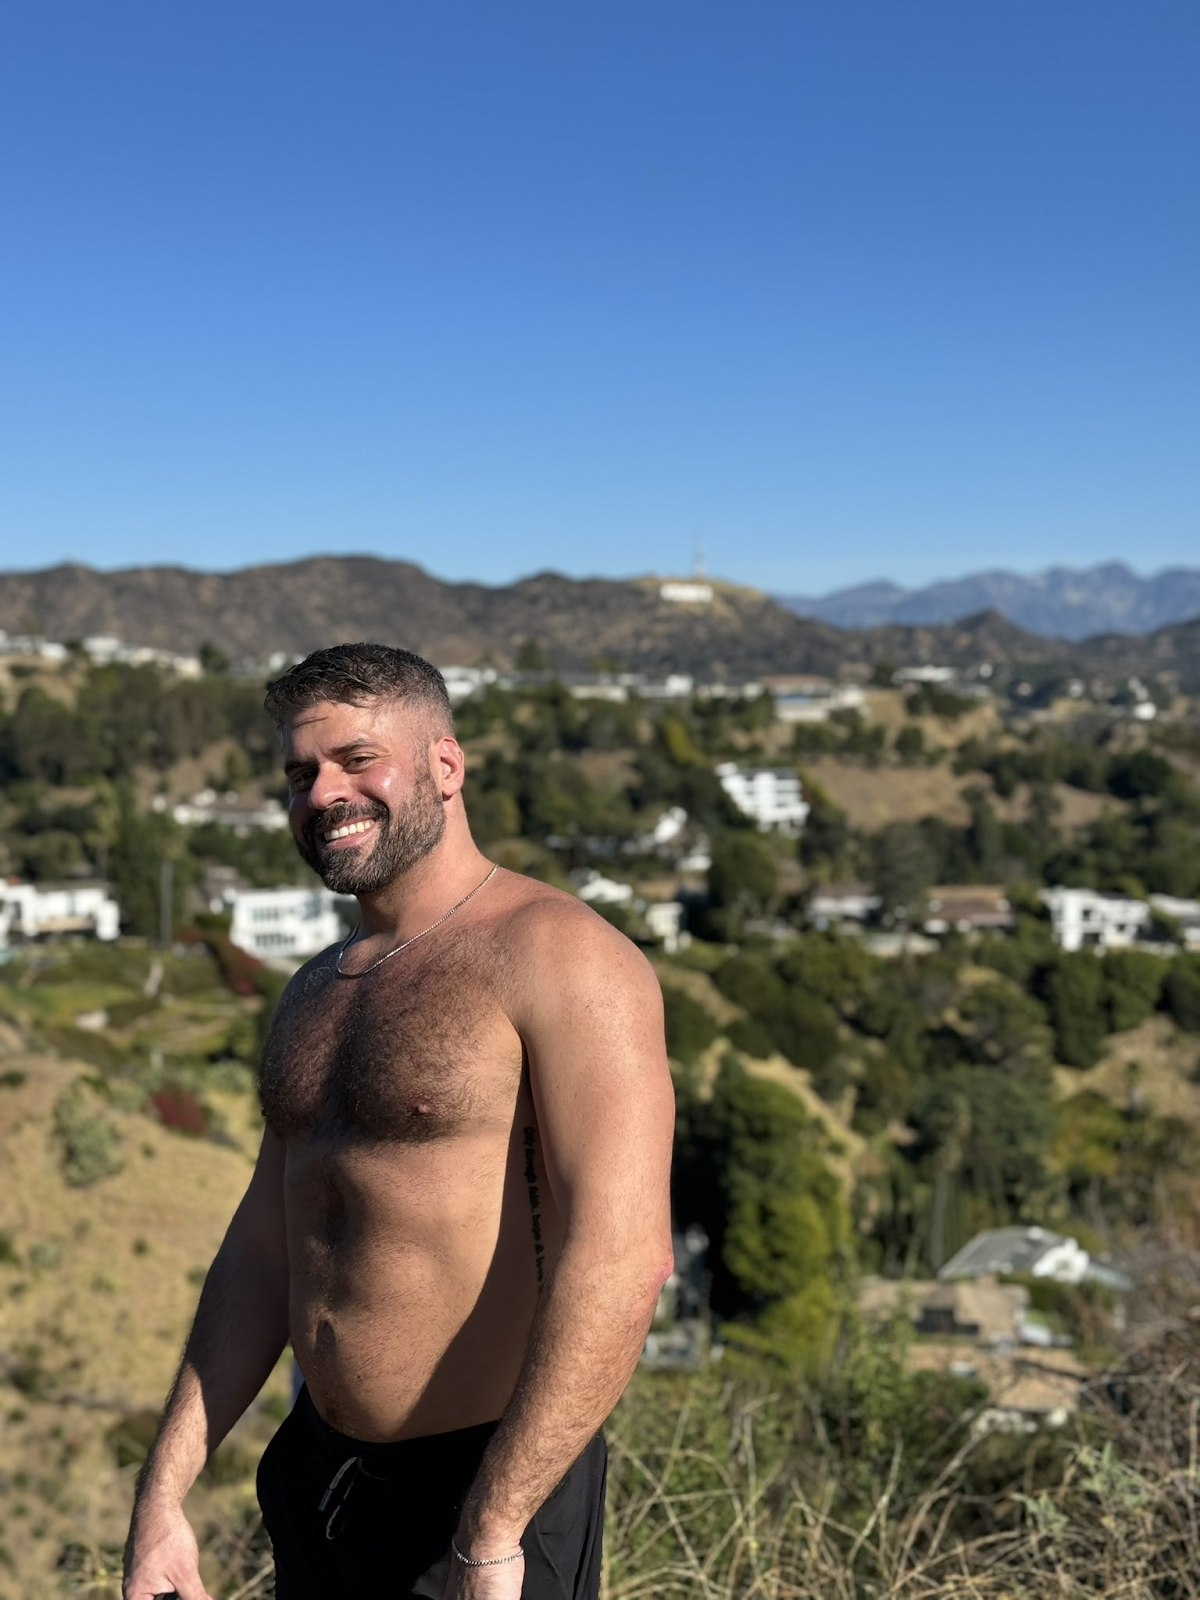 Max Romano standing shirtless outside smiling for a photo while wearing black sweat shorts